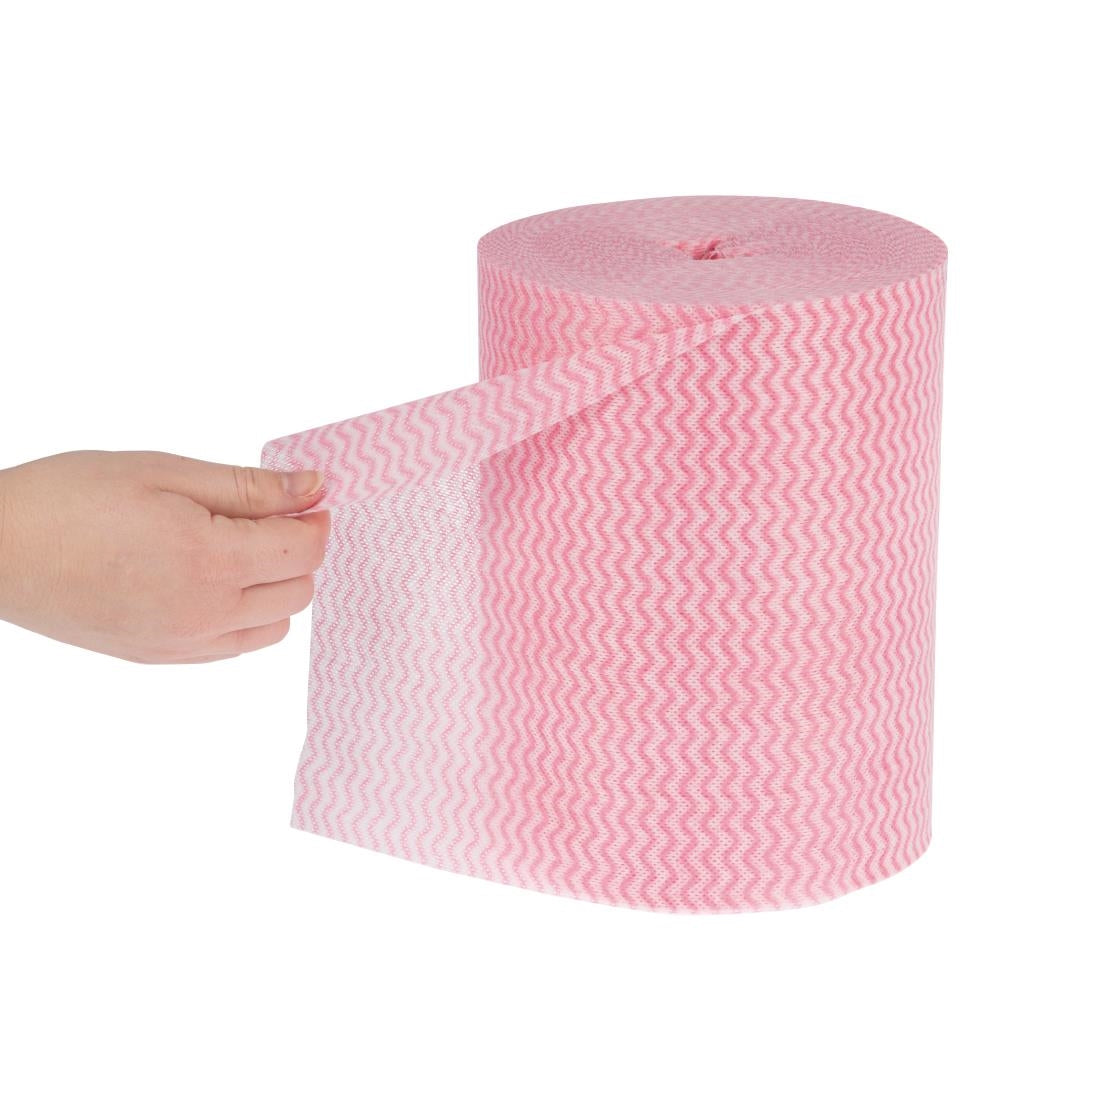 DN844 Robert Scott All-Purpose Antibacterial Cleaning Cloths Red (Pack of 200) JD Catering Equipment Solutions Ltd